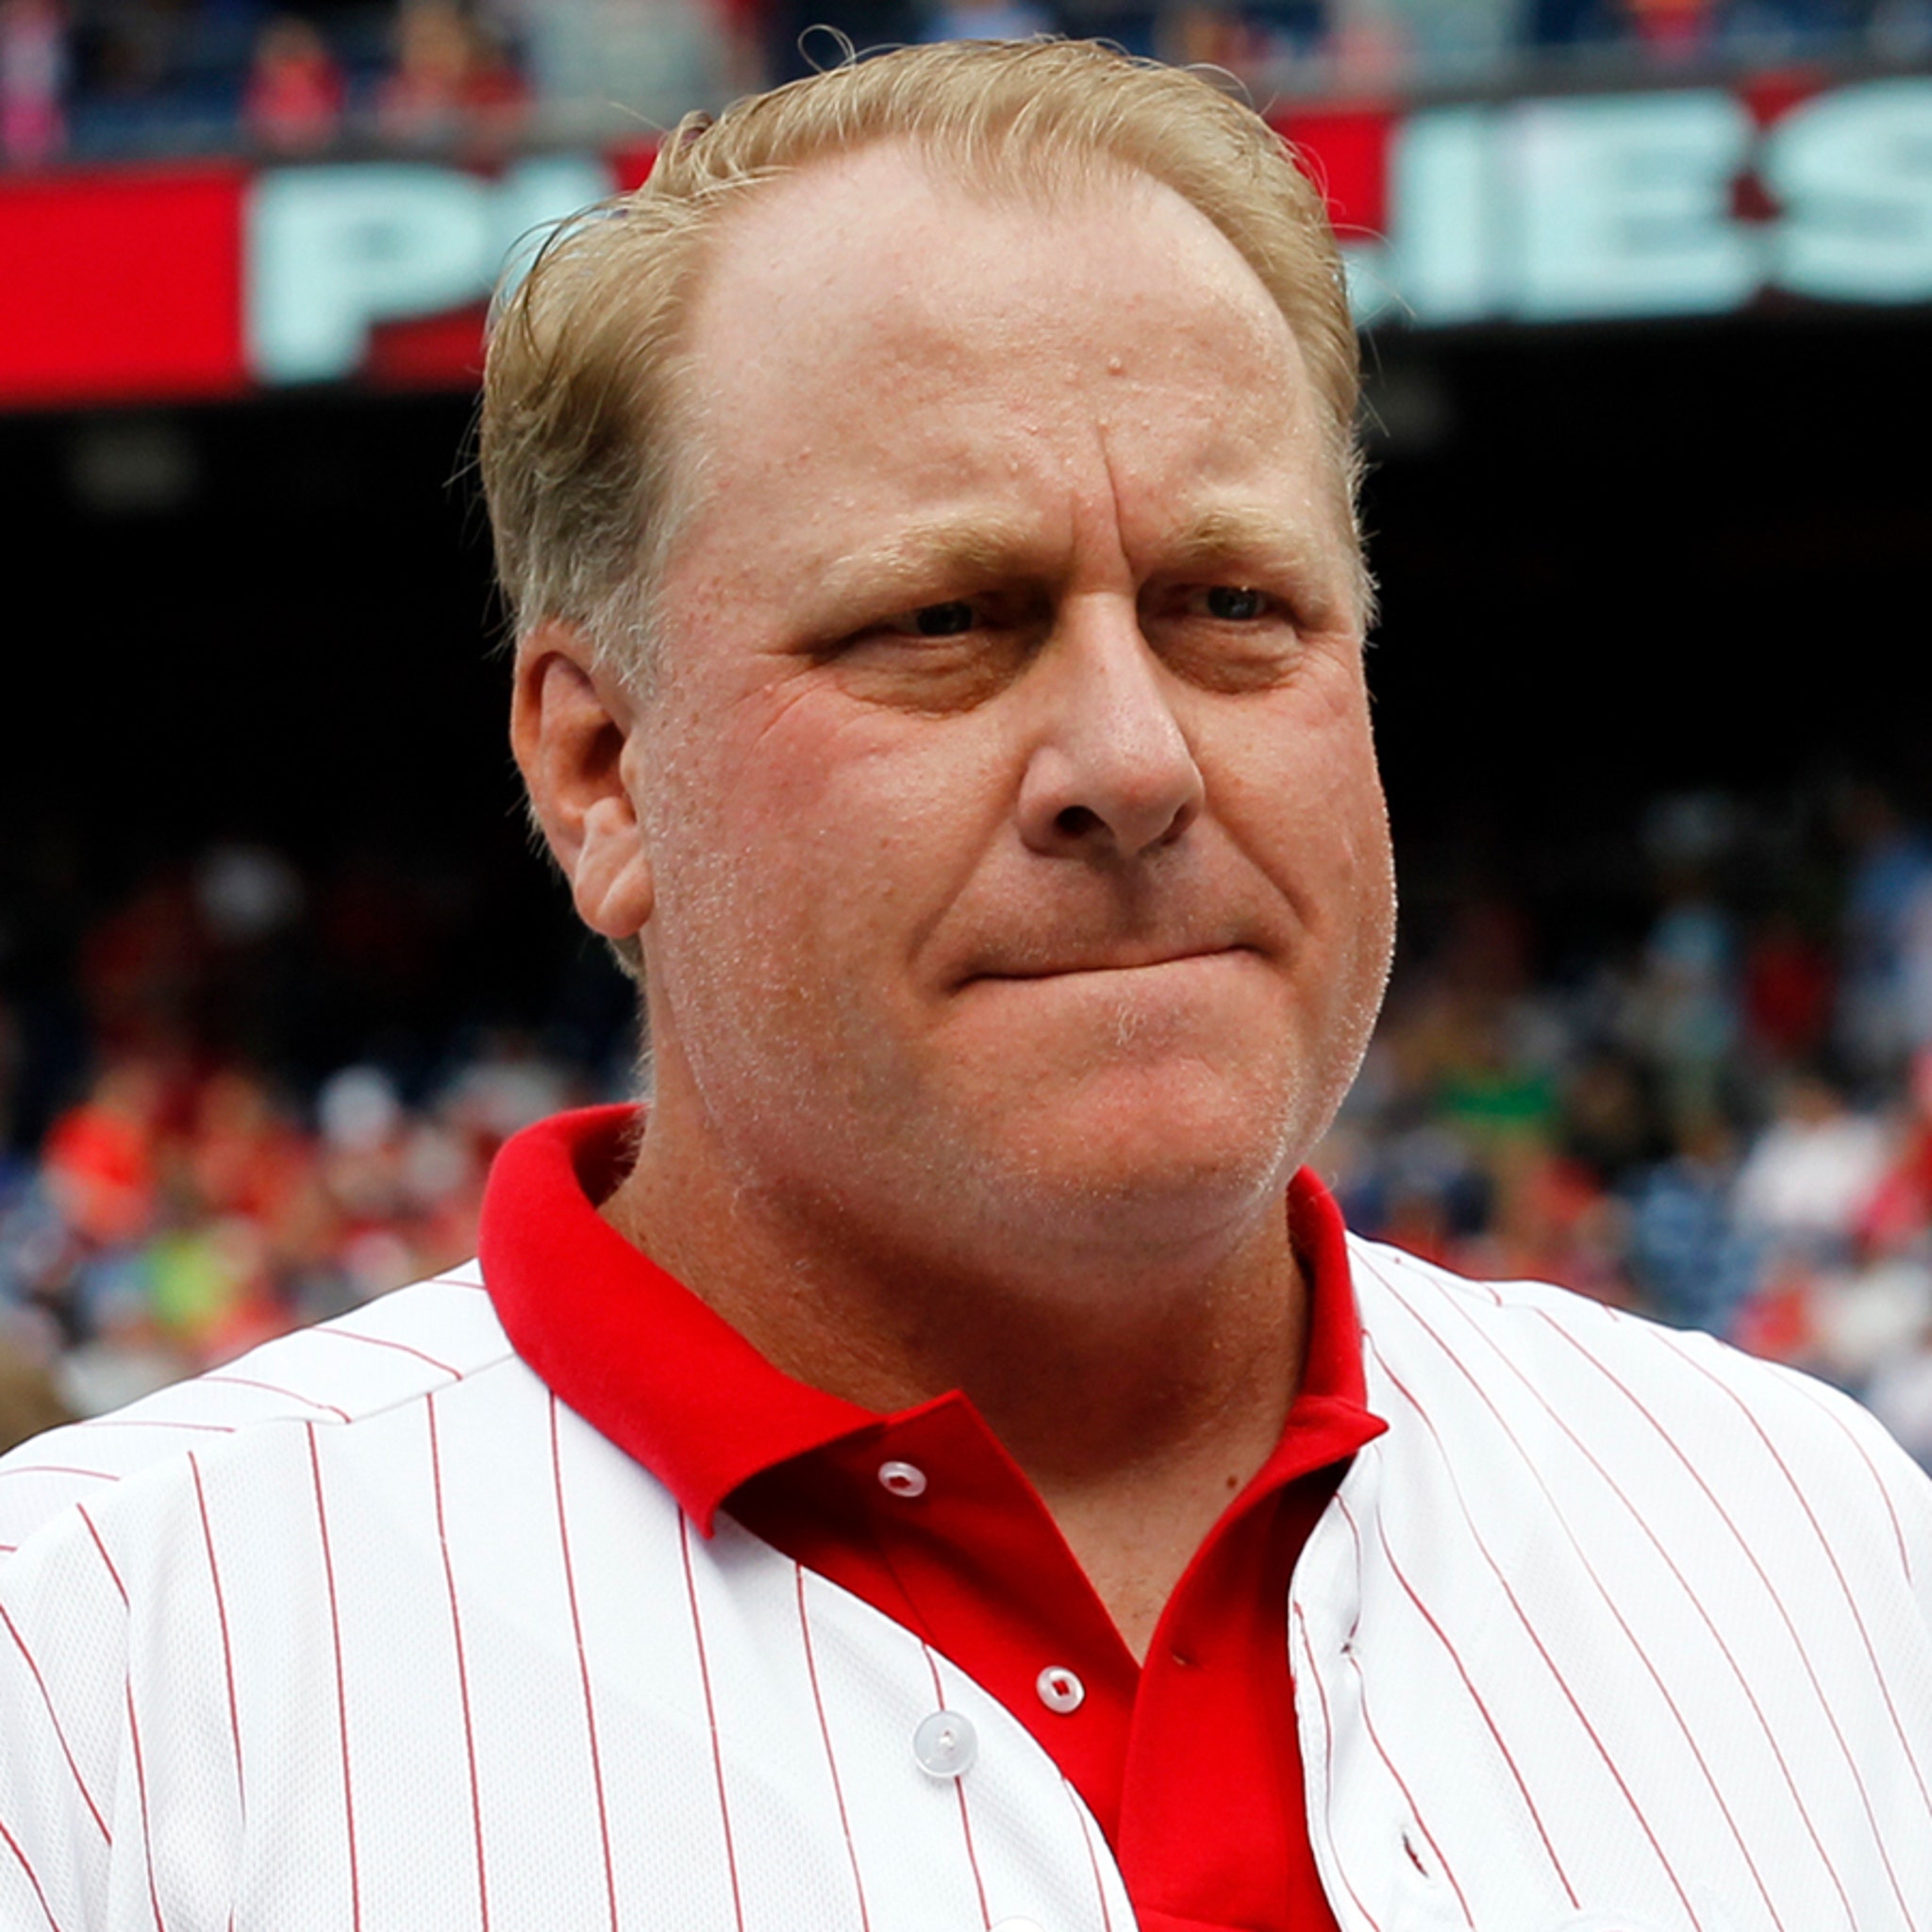 JAWS and the 2015 Hall of Fame ballot: Curt Schilling - Sports Illustrated